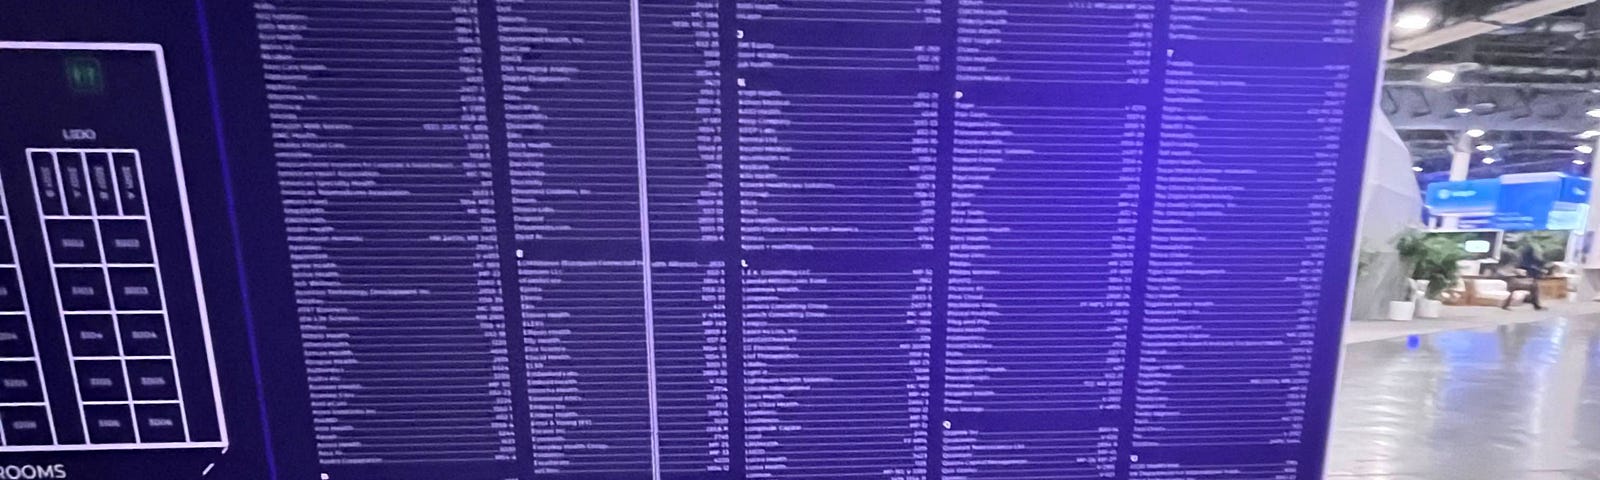 List of companies represented at HLTH 2022